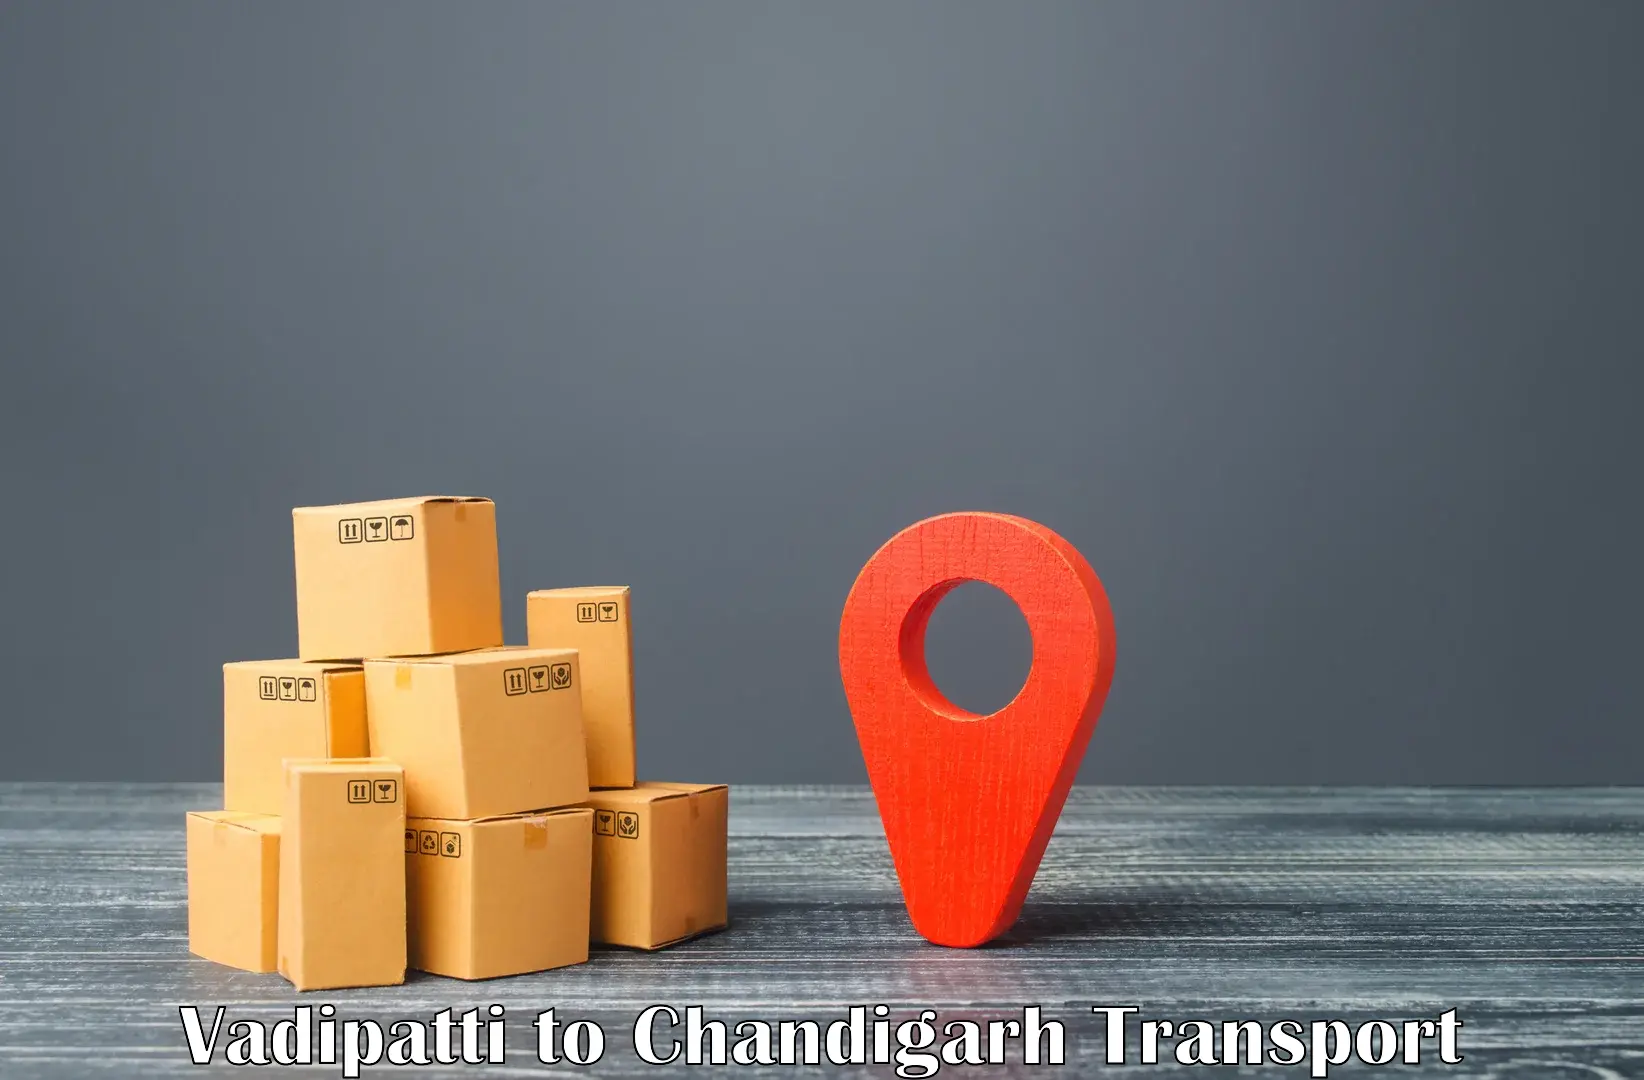 Air cargo transport services Vadipatti to Chandigarh